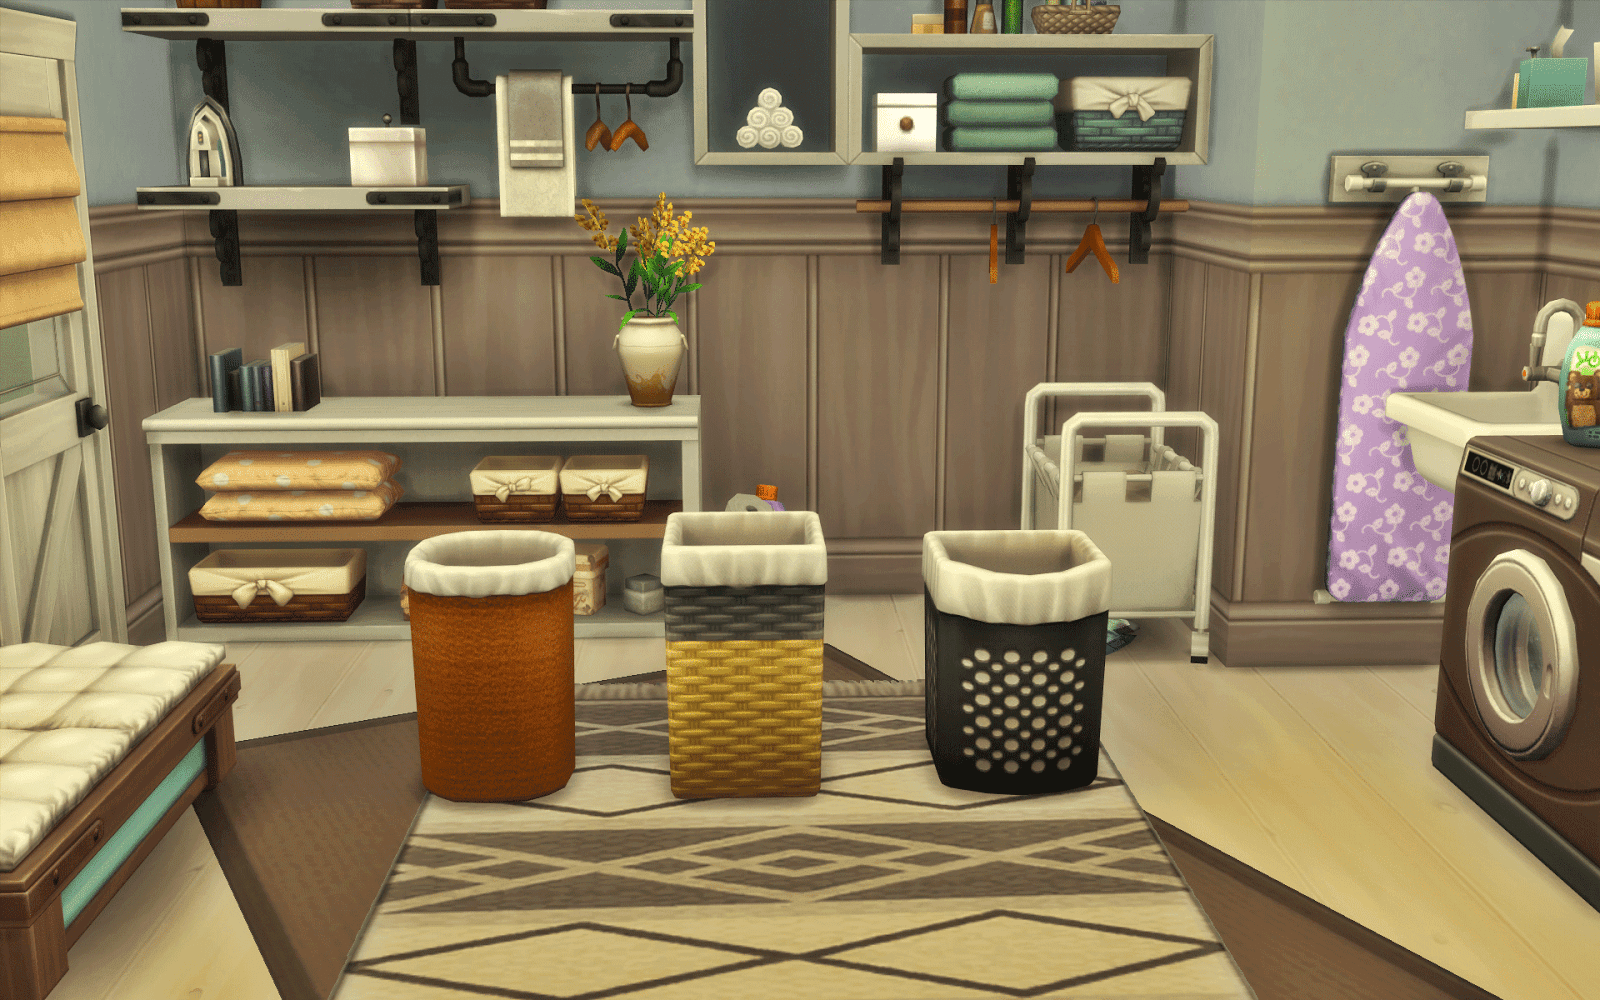 Laundry day. Laundromat ГТА 4. SIMS 2 Kitchen stuff Pack. The SIMS™ Laundry Day stuff items. The SIMS 4 Chic Bathroom stuff - merged (includes Seasons, discover University, Laundry Day).